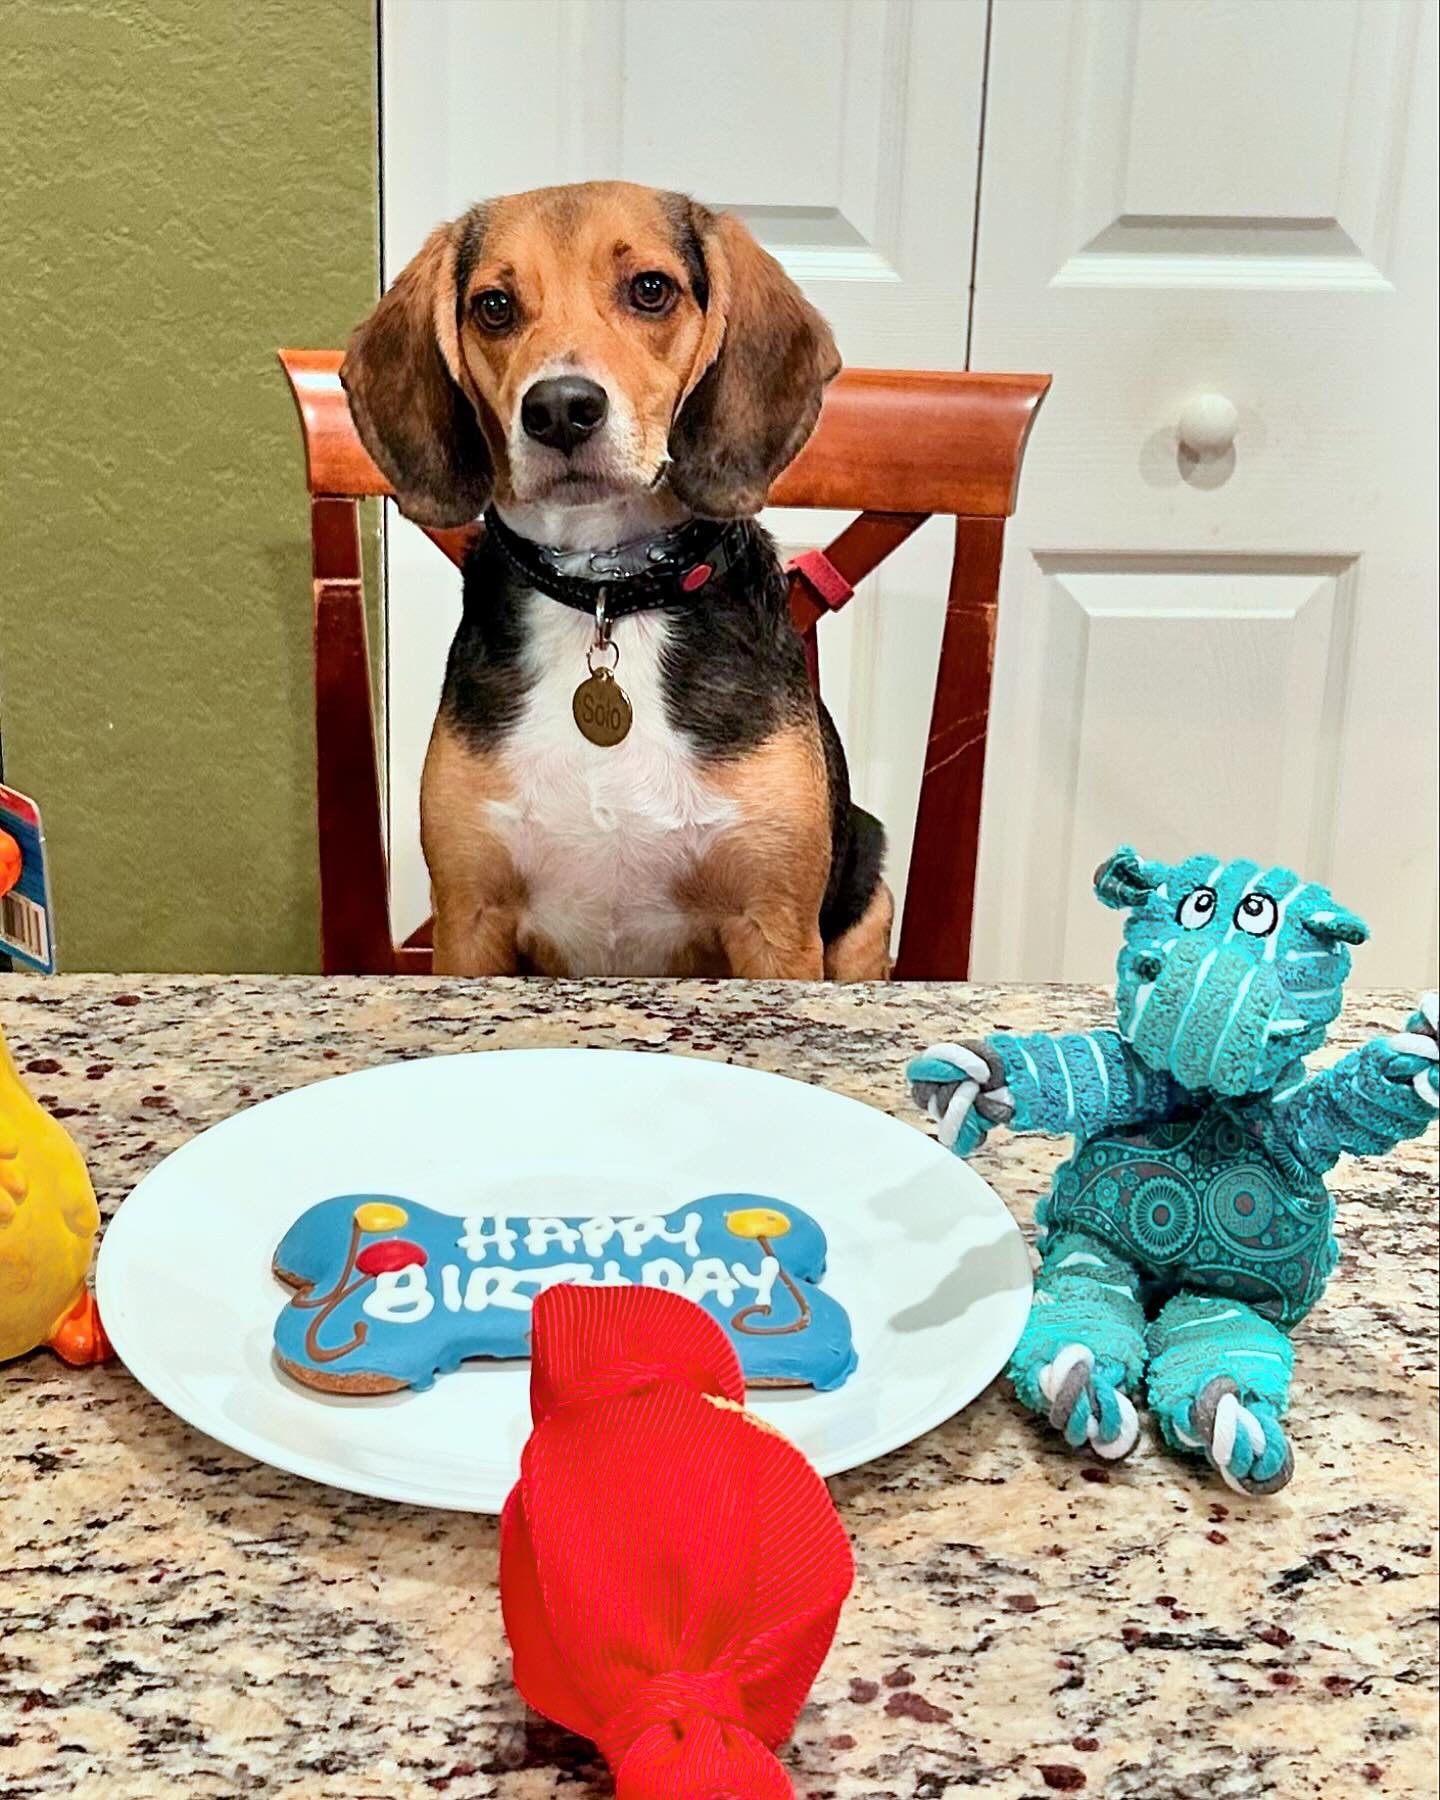 With hugs and cuddles, and treats and toys, Solo celebrated his 4th birthday today! 🐾&hearts;️🎉
#beaglemom

#beaglebirthday #beagles #beaglesofinstagram